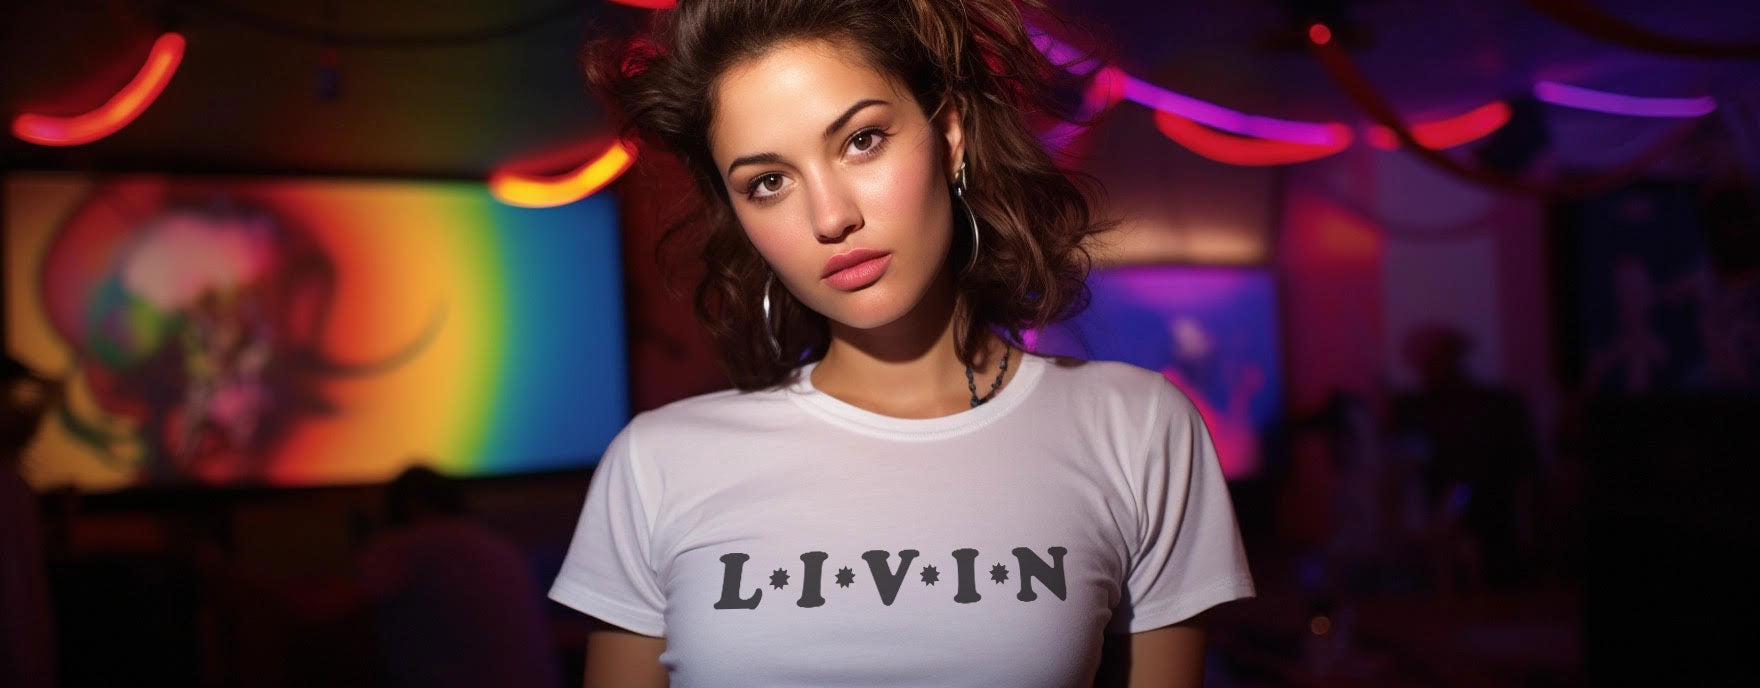 90's ShirtLoaf Model with classic LIVIN 90s movie shirt roller skating